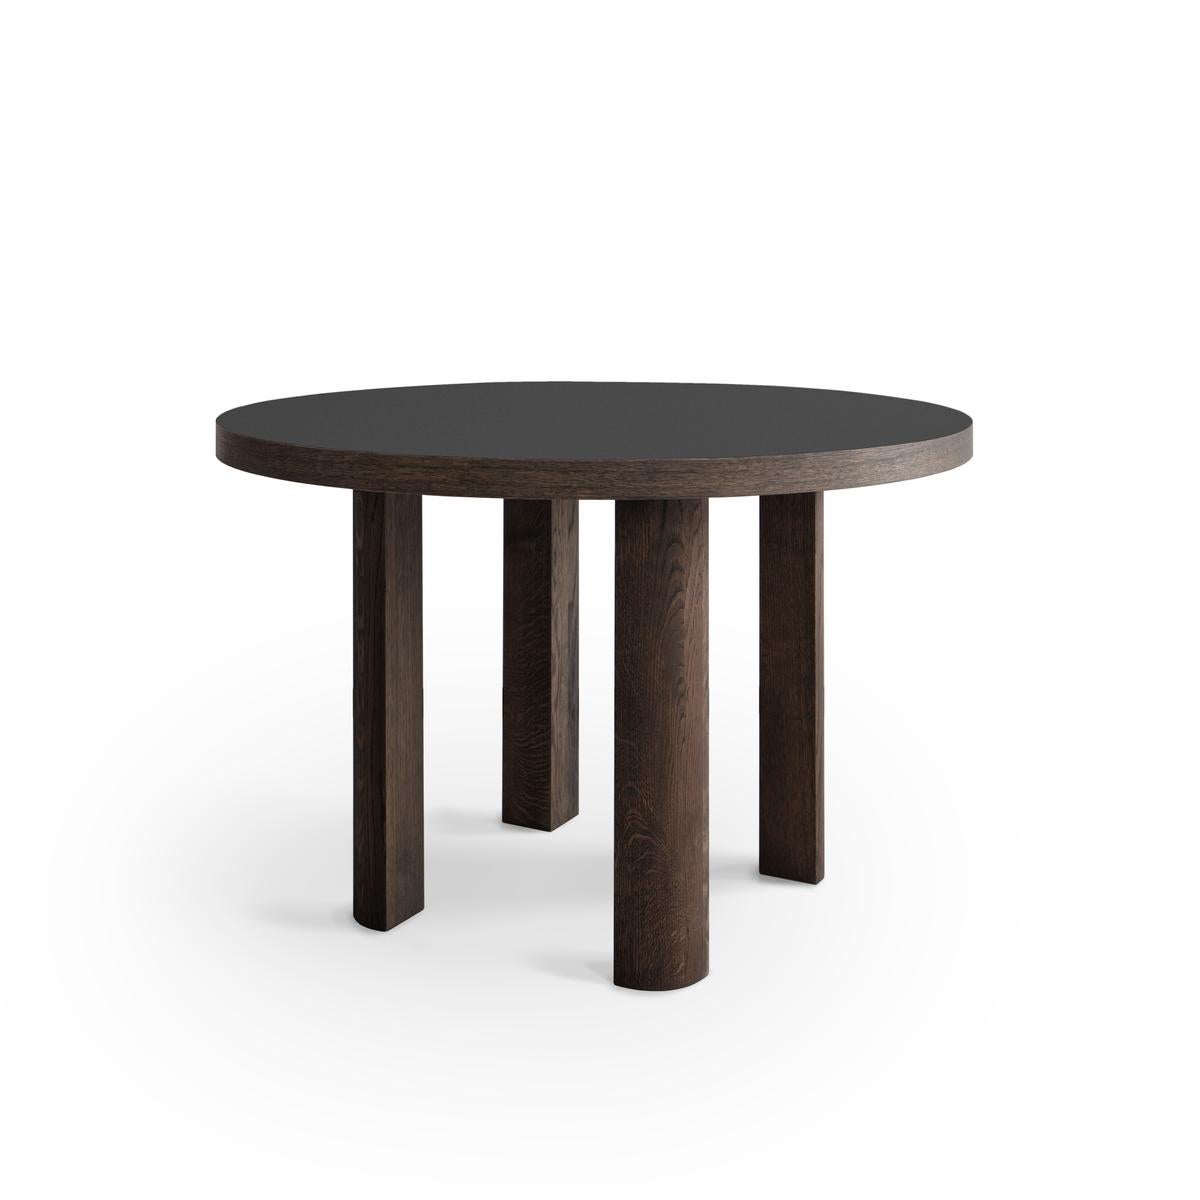 'QUARTER' Round table
Designed by IDA L. HILDEBRAND

Dimensions: diameter 120 cm / height 75 cm / top thickness 5 cm
Model in the picture : smoked oak - black laminated tabletop 

FRIENDS FOUNDERS create contemporary designs with strong